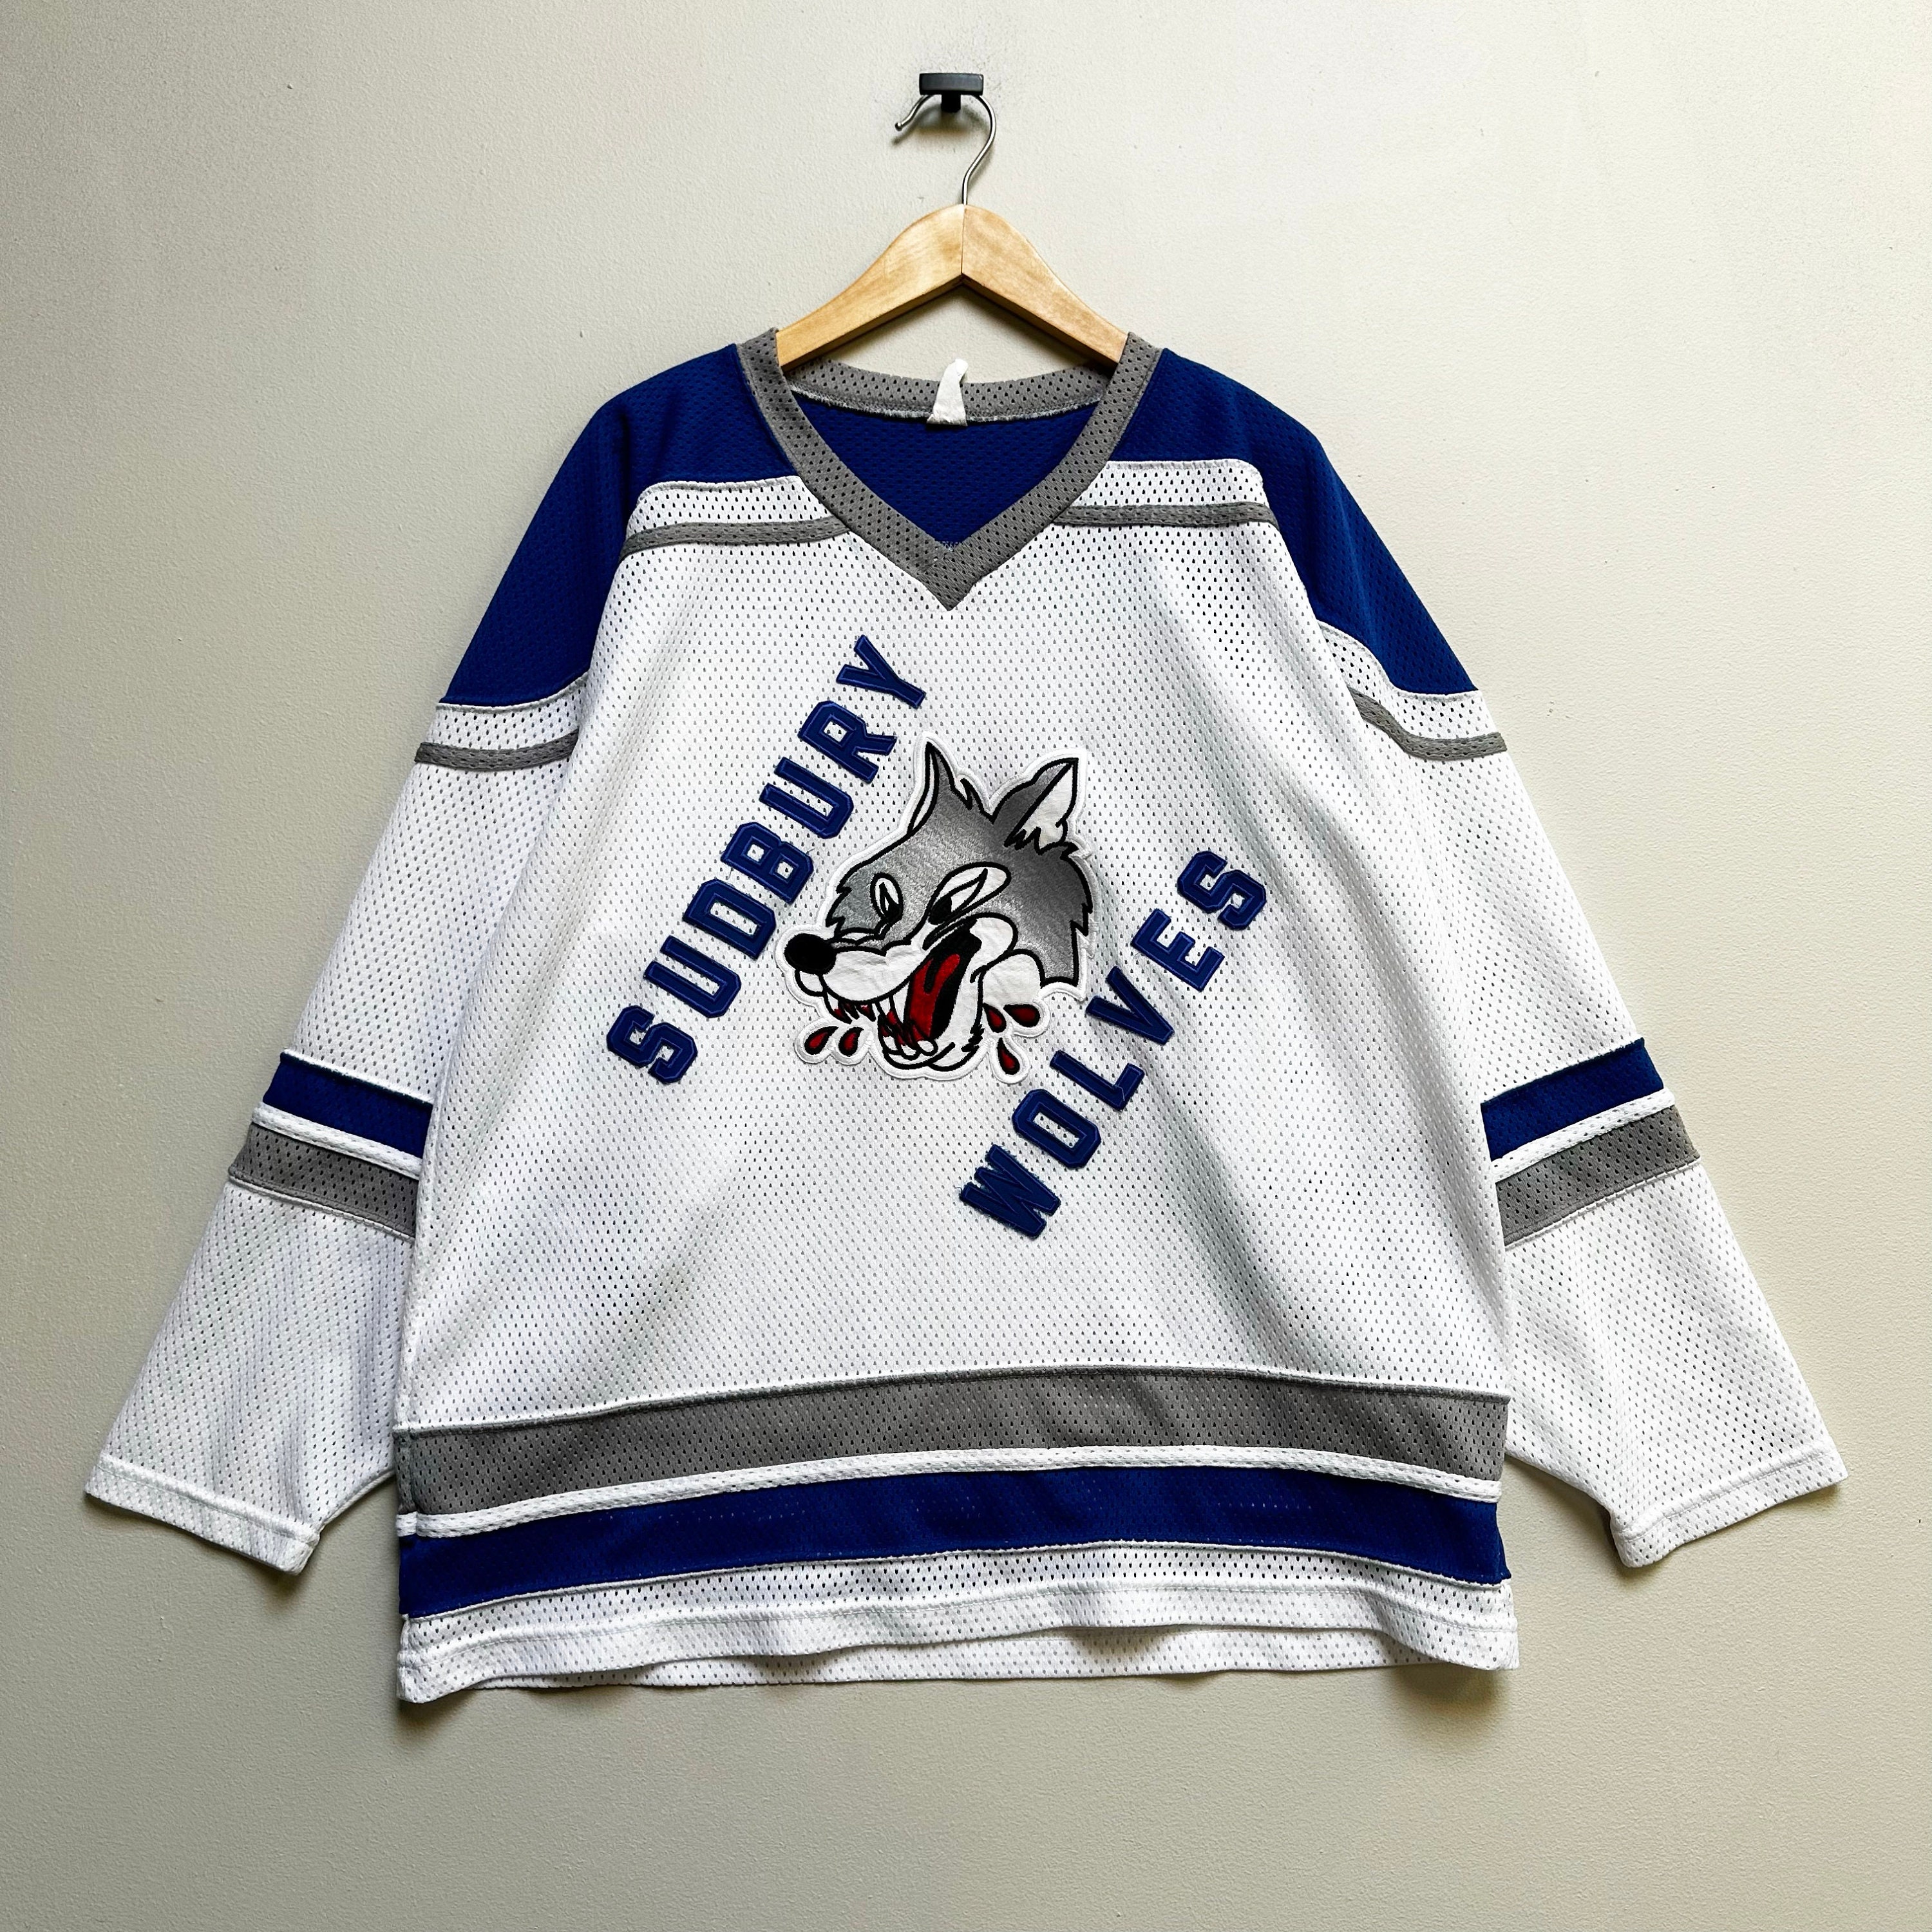 Vintage 90s Sudbury Wolves Patched Hockey Jersey